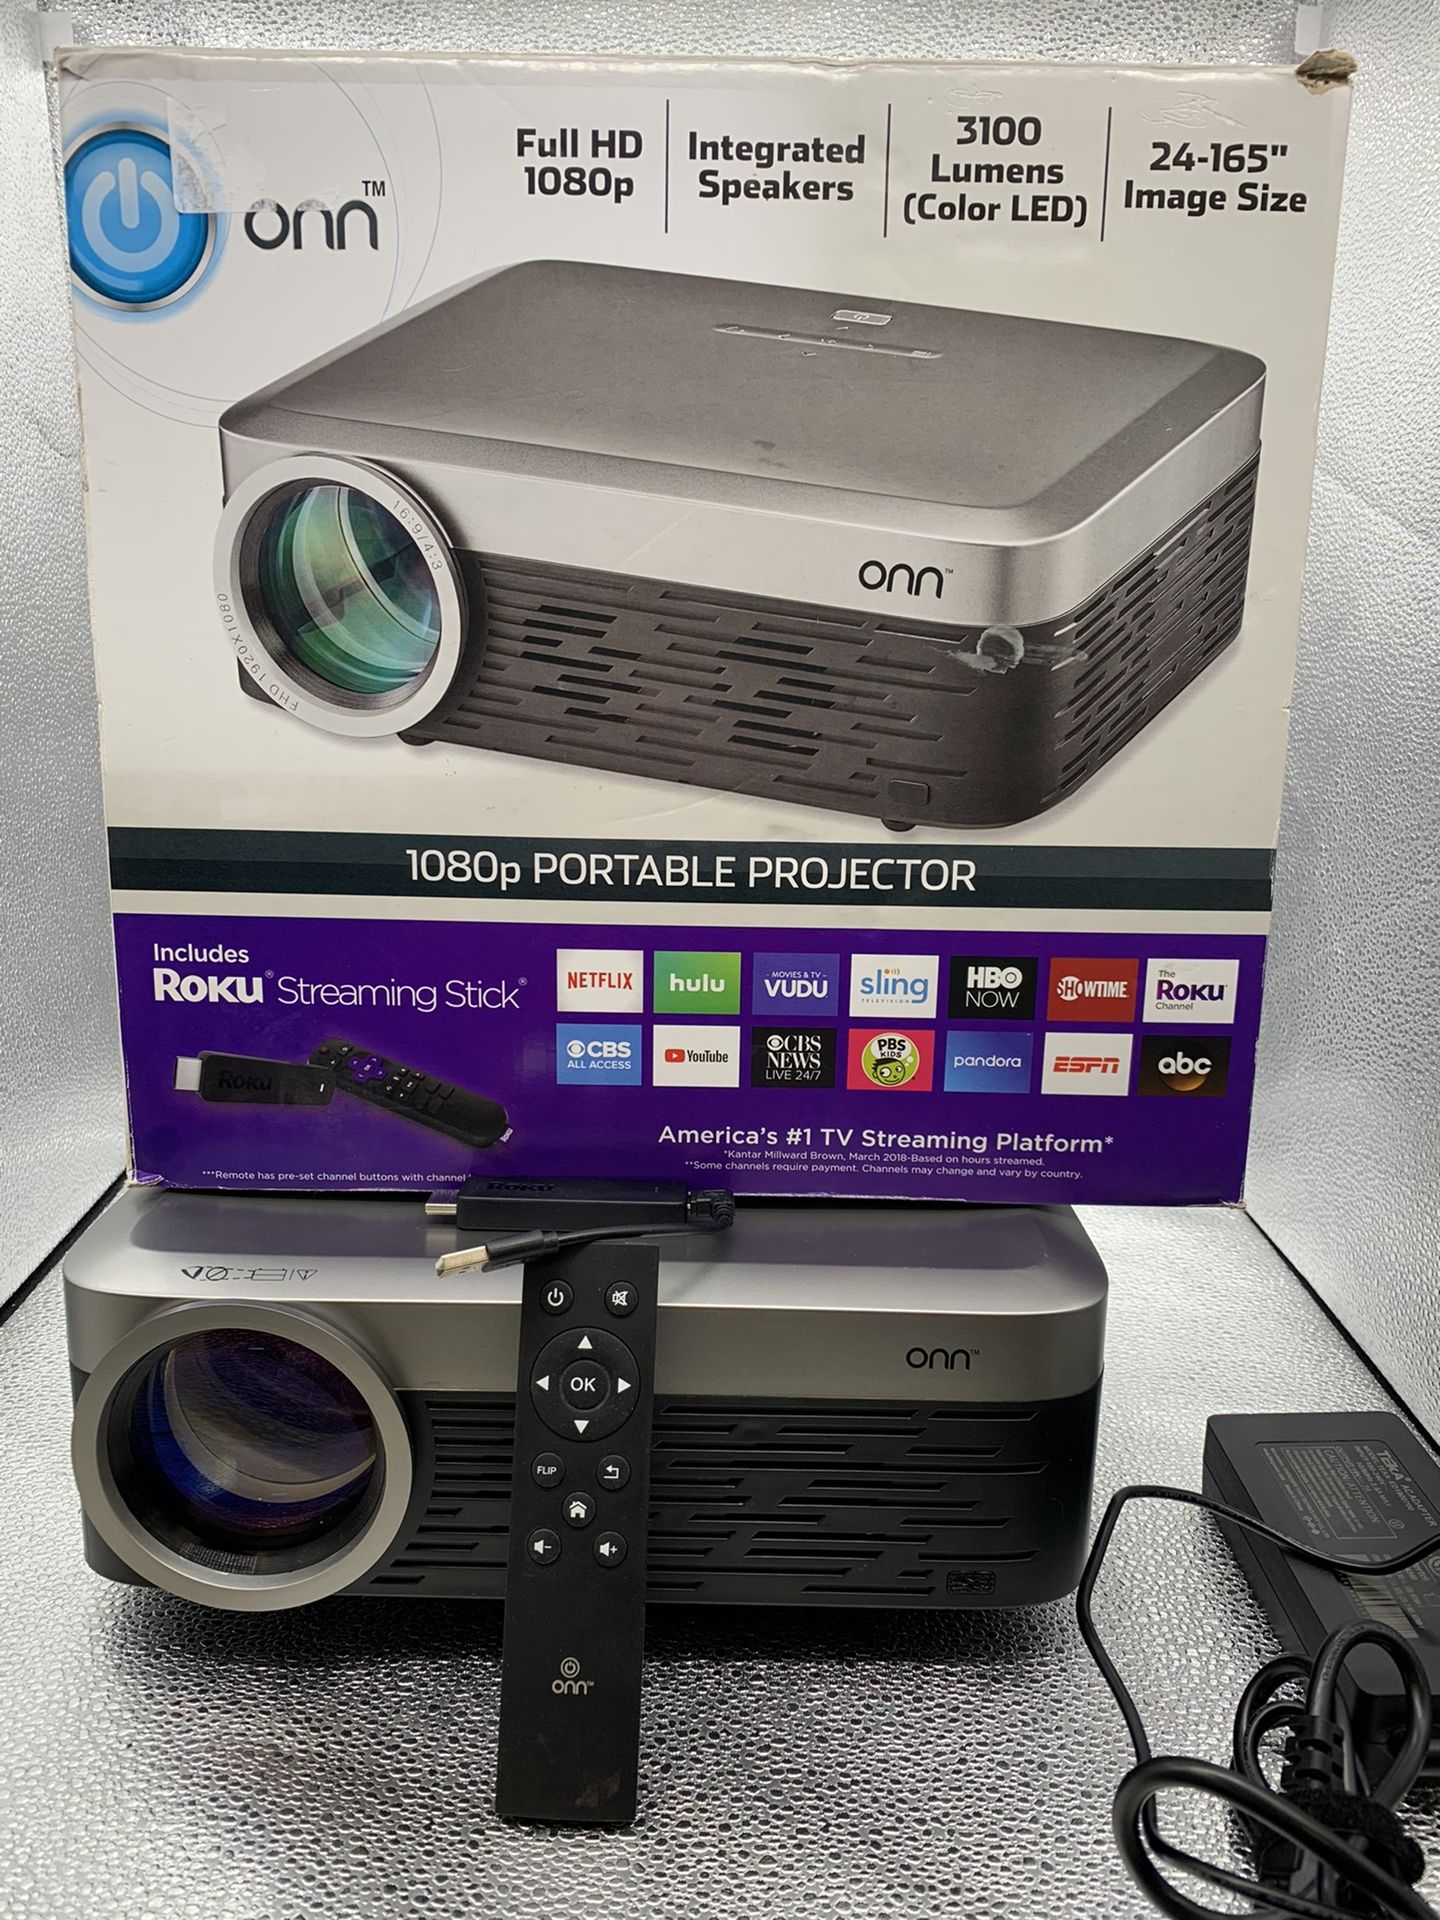 Onn 1080 p Portable Projector includes Roku Streaming Stick #27976-1